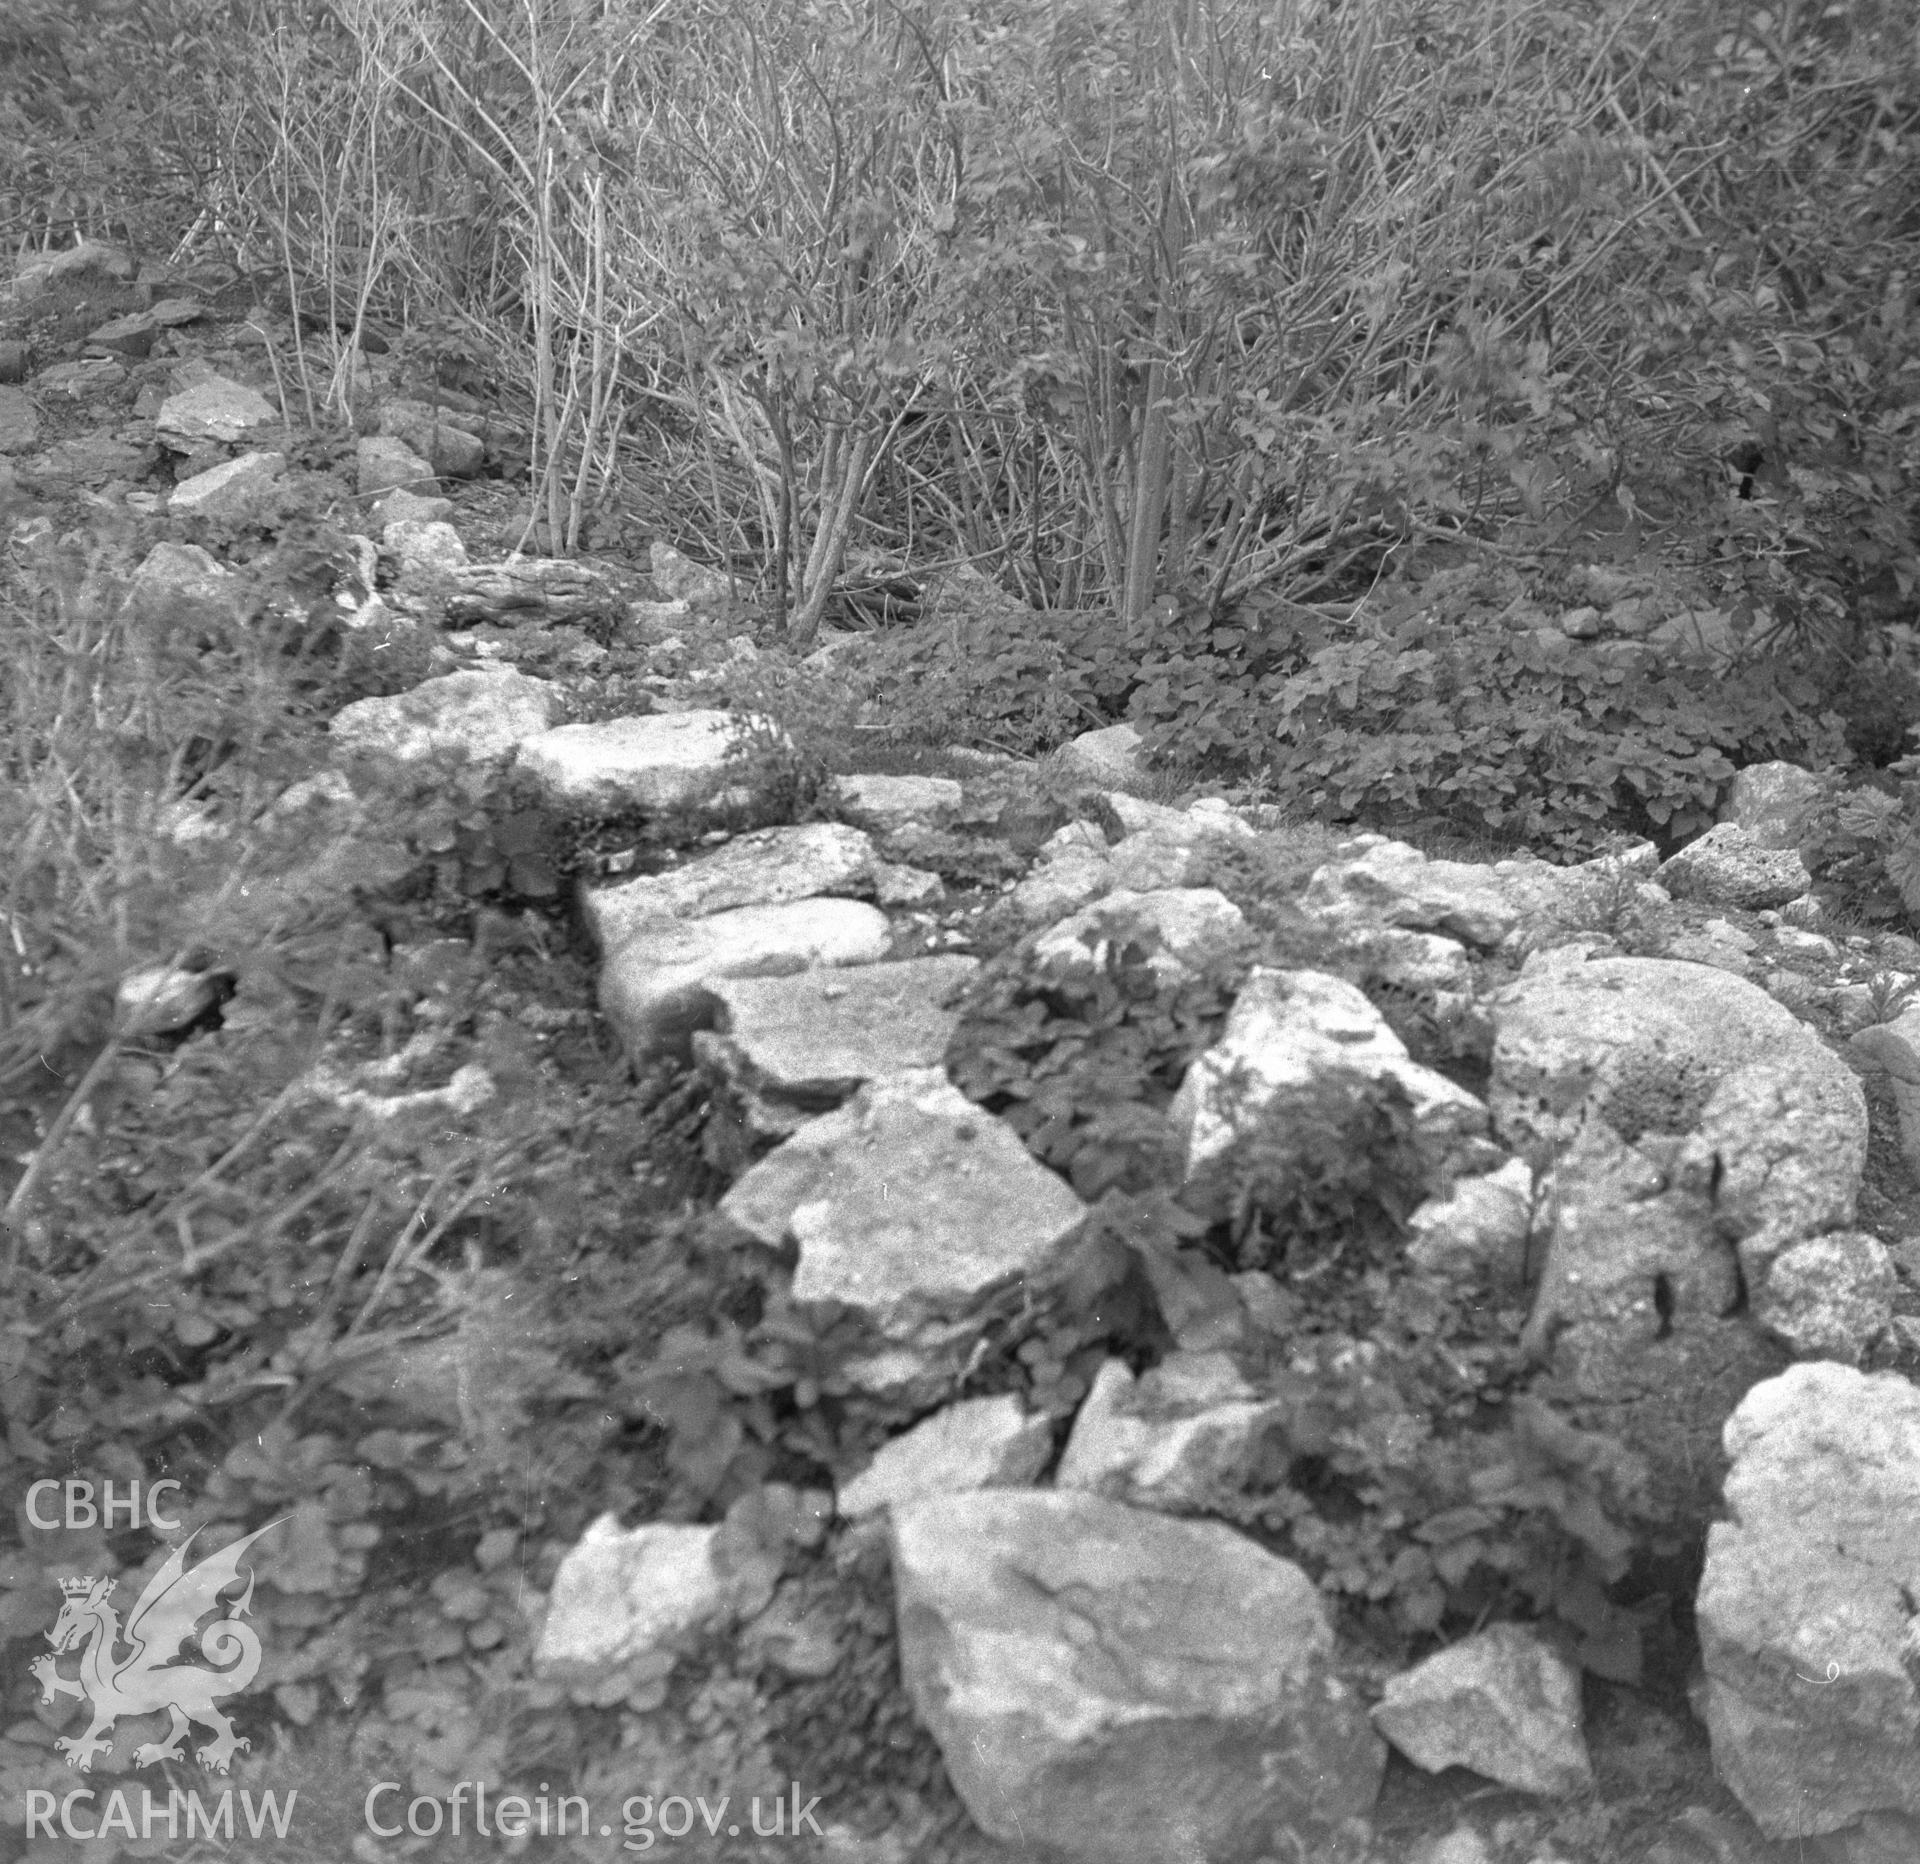 Digital copy of a black and white negative showing a view of ruined stone wall on Puffin Island.